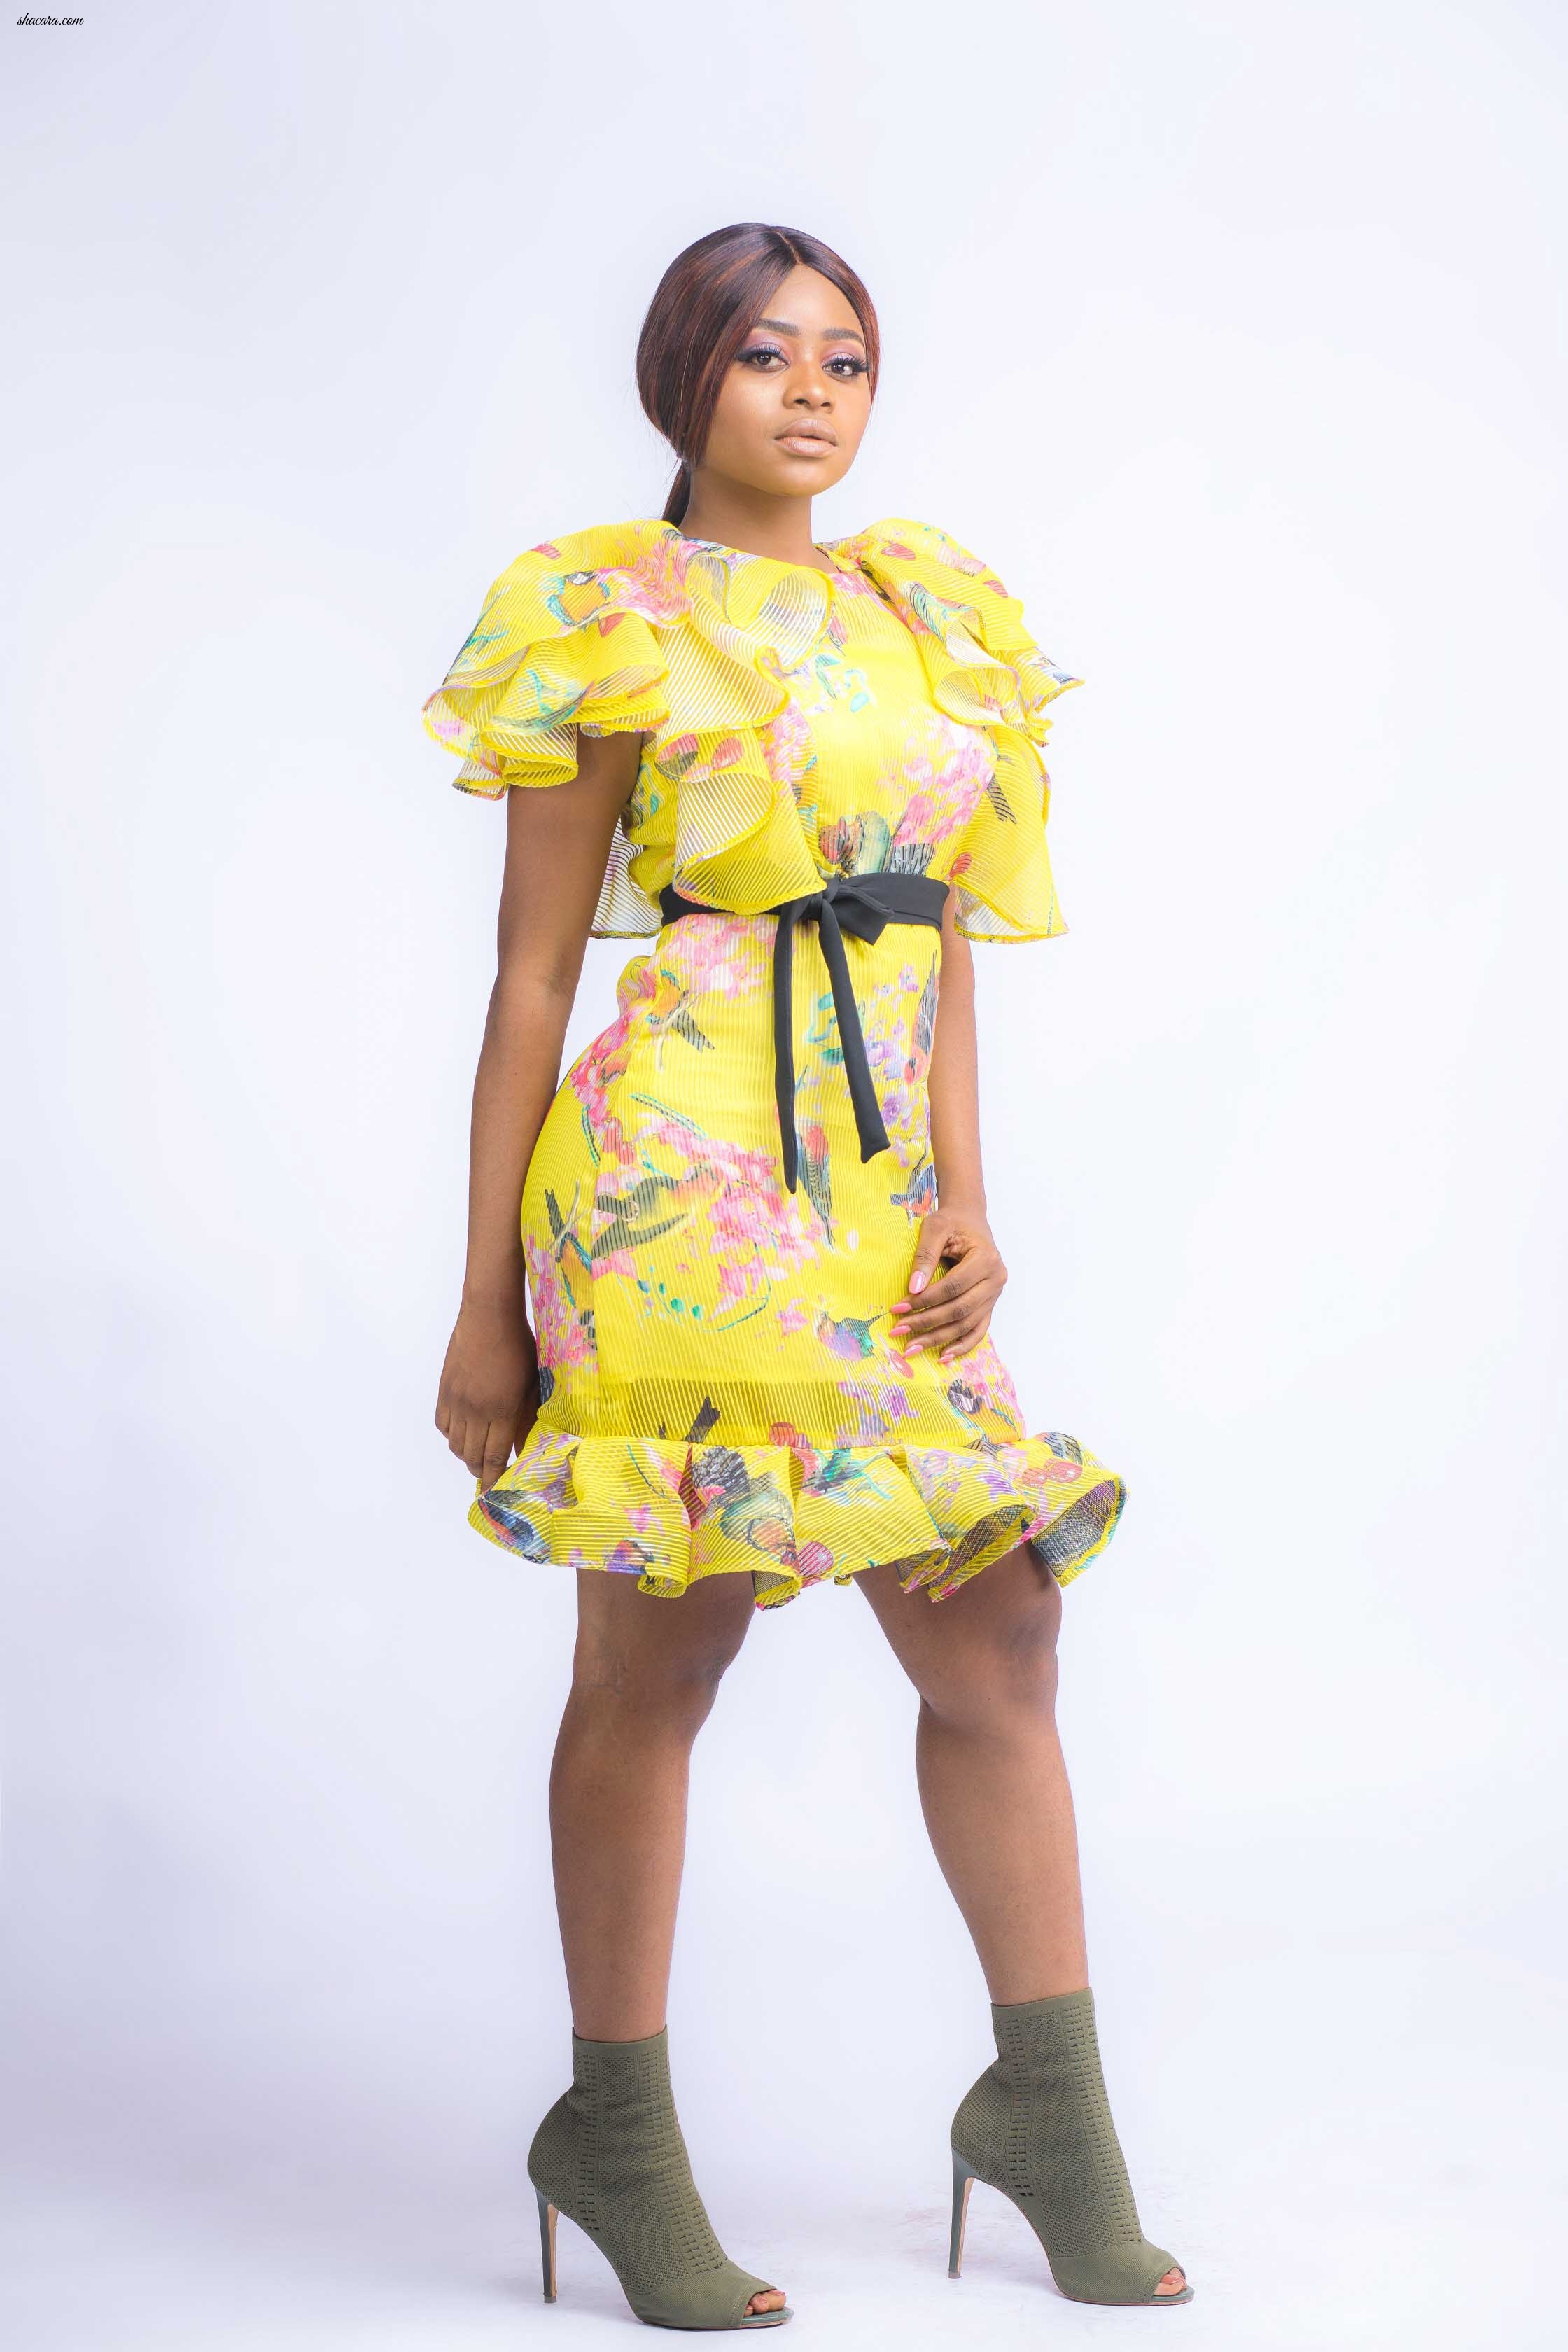 Comedian Bovi’s Wife Kristal Ugboma, Makes A Debut Into Fashion With “Good Girl Code”